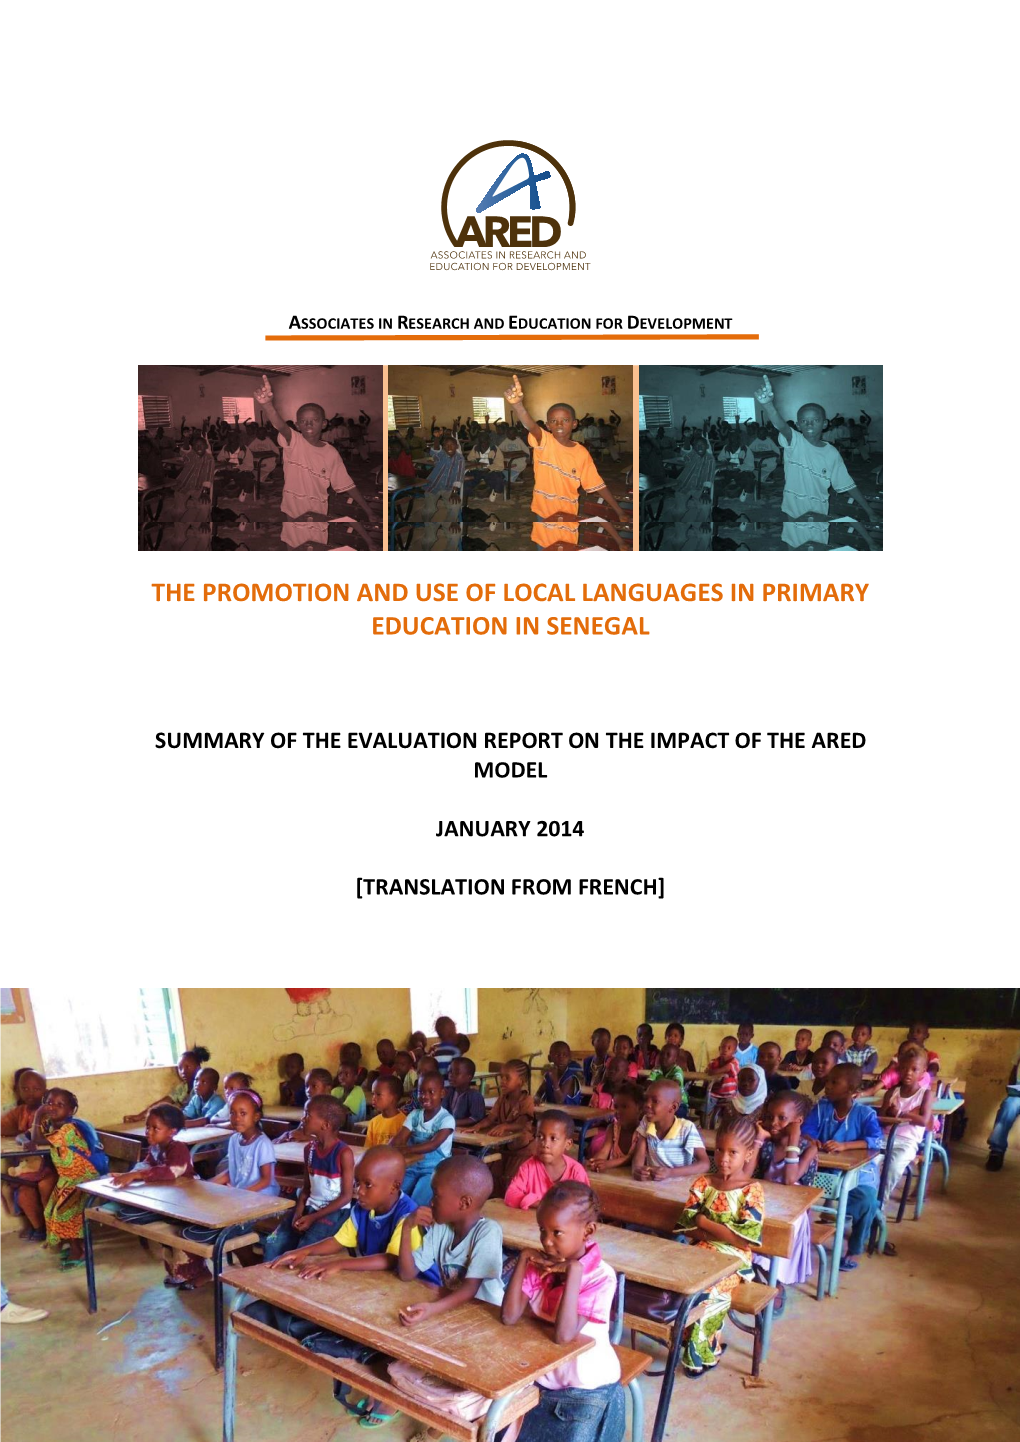 The Promotion and Use of Local Languages in Primary Education in Senegal